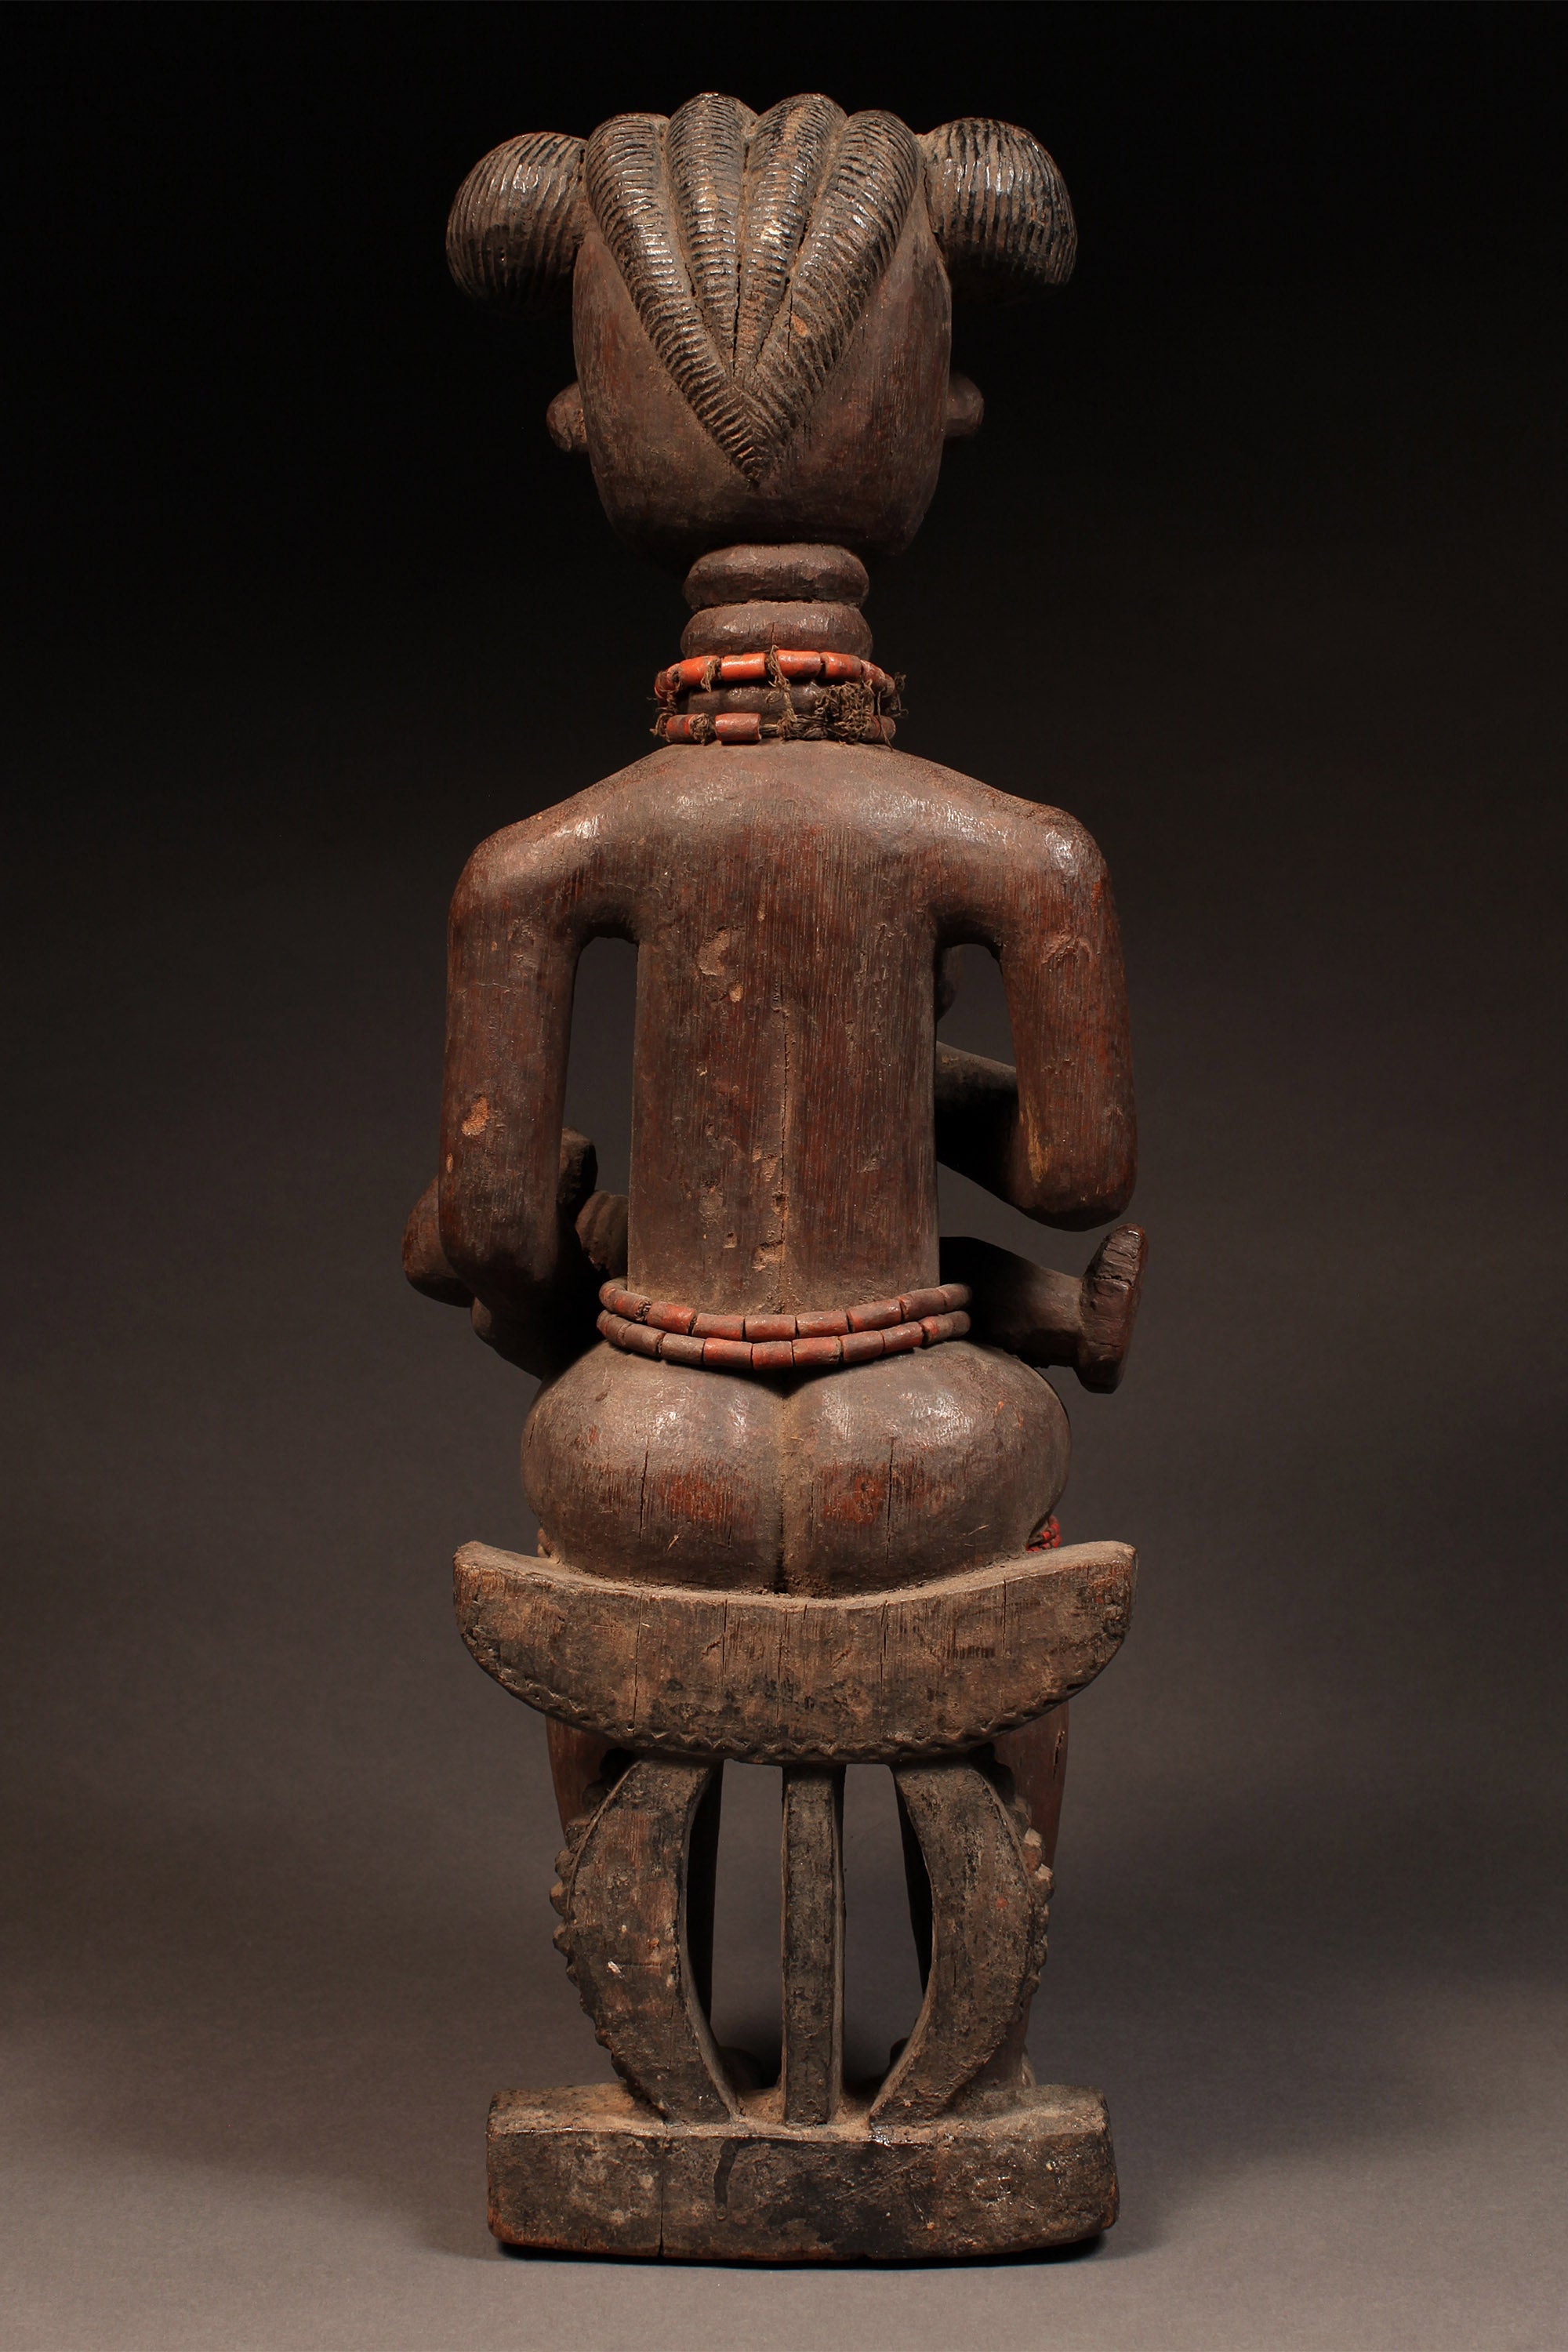 Tribal Sculptures - Traditional - Folk Art - African - Artwork - Objects - Artifacts - Statues Figures - Collectible - Beautiful Ashanti Asante - Maternity Figure - Hand Carved Wood in Ghana - Embellished Intricate Details - Stands 8.7 inches Tall - Stunning Representation Culture - Addition Collection Home Decor